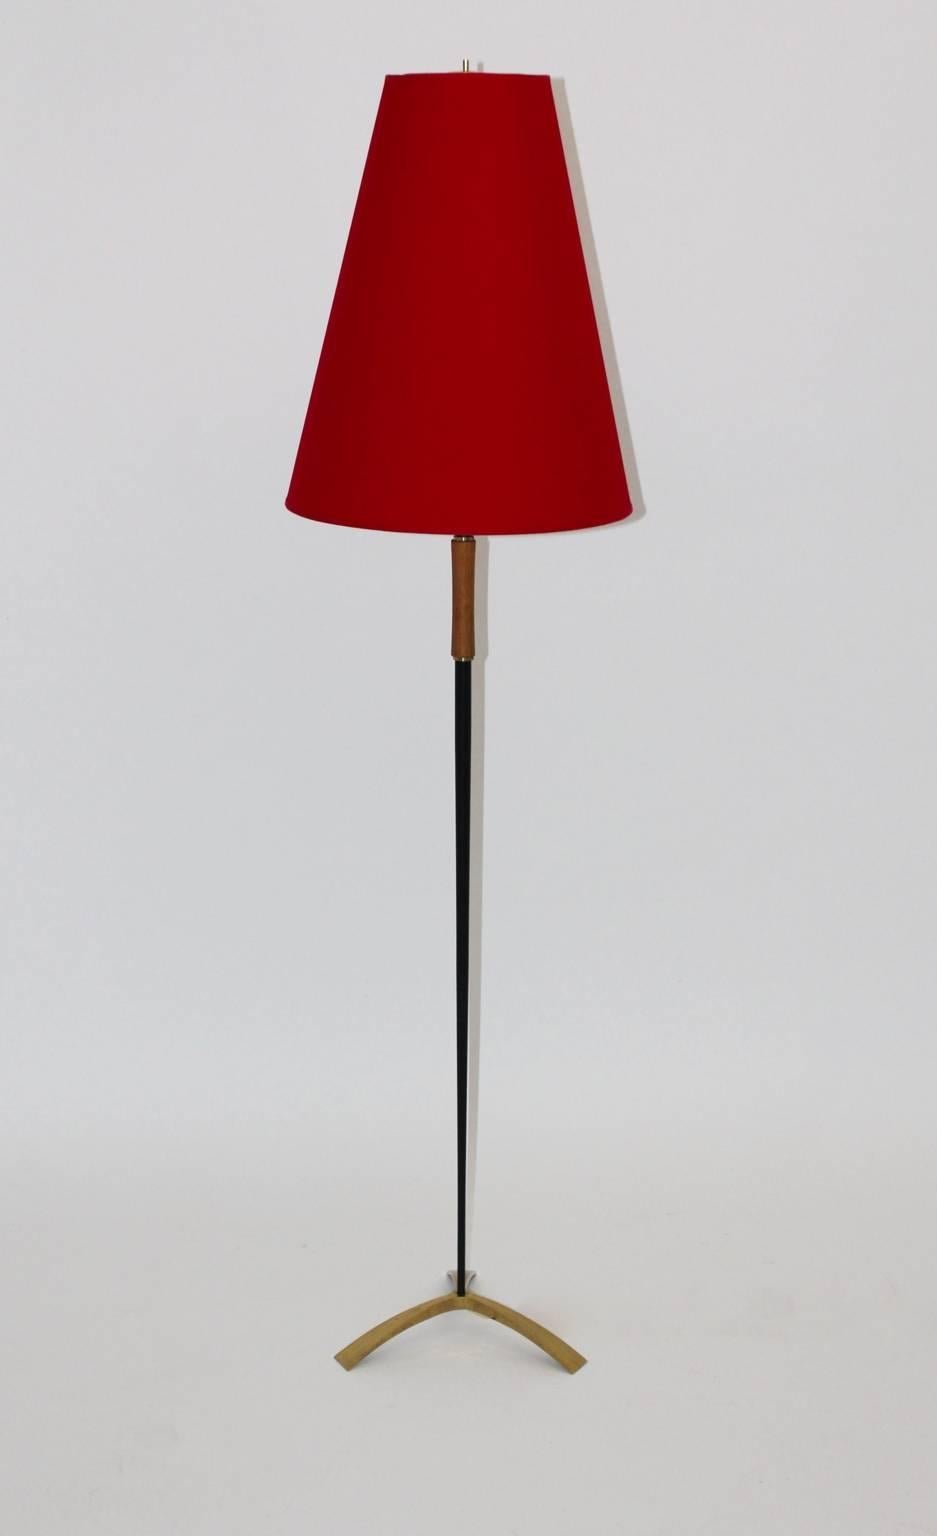 Mid Century Modern red black metal tripod floor Lamp by J. T. Kalmar, 1950s Vienna, Austria.
The floor lamp shows a brass tripod lamp base with a  conical metal stand black lacquered and a wooden handle.
One socket E 27, renewed red fabric shade